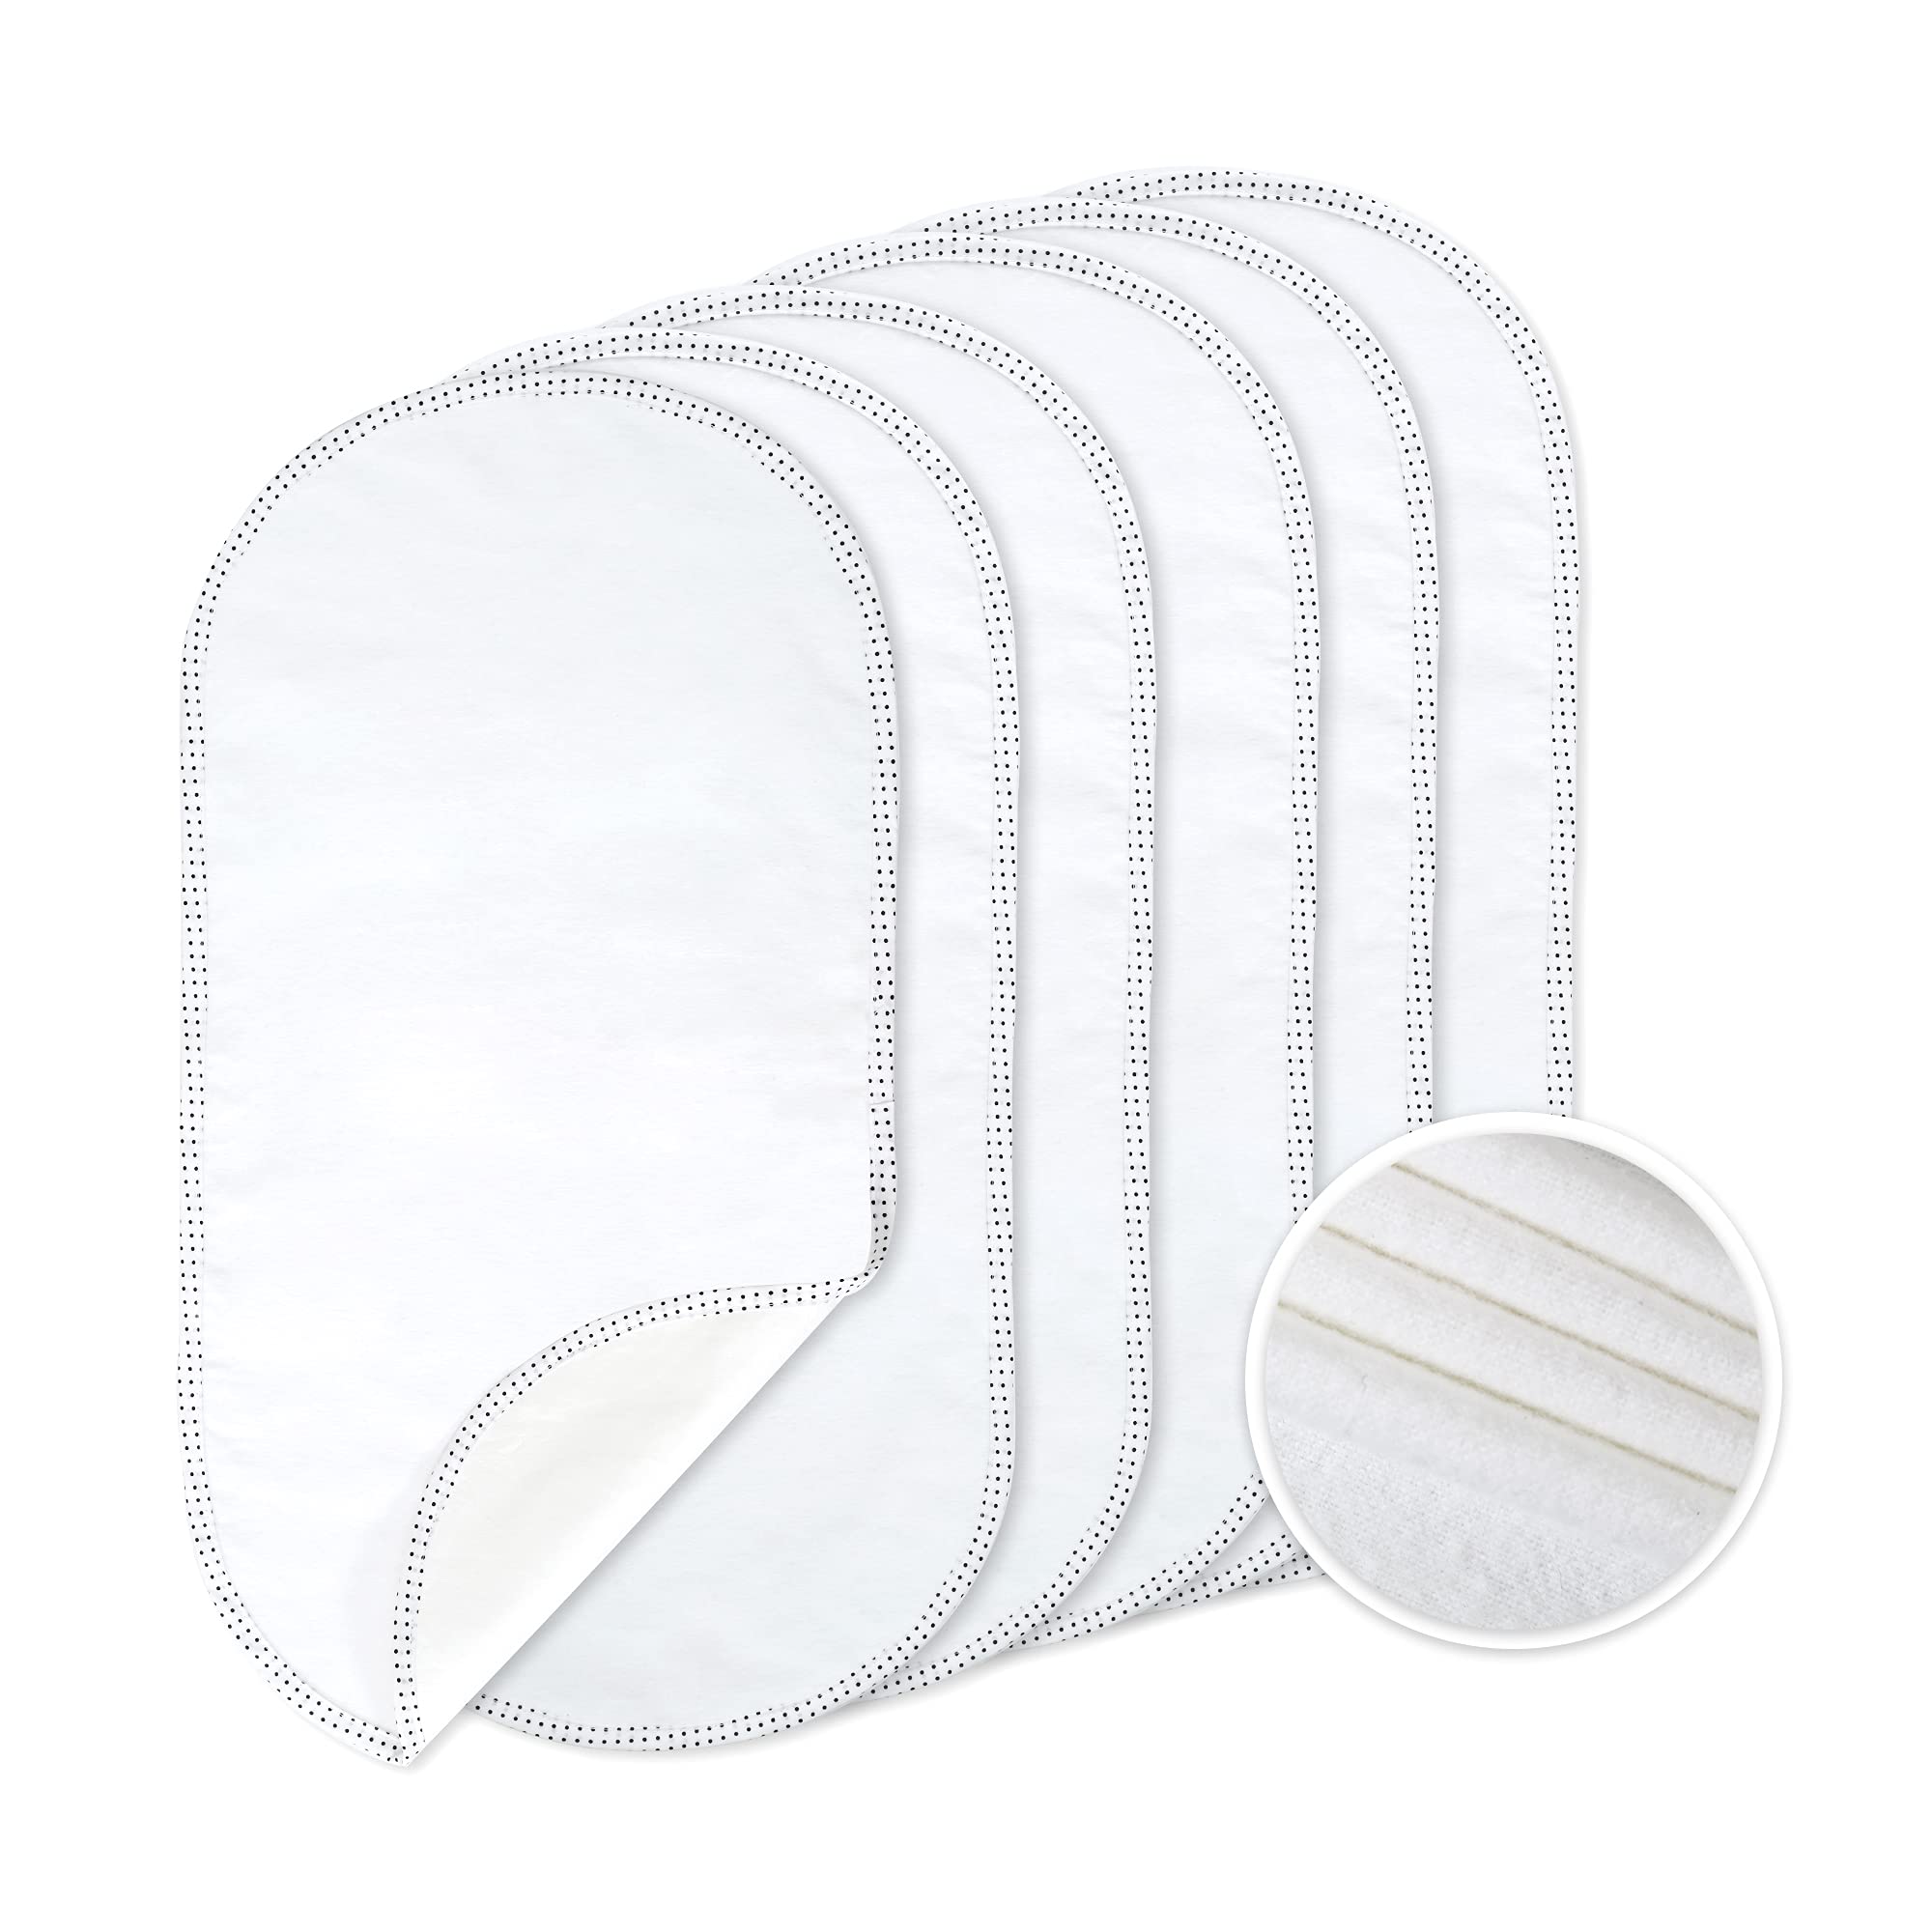 TILLYOU 6PK Larger Softer Changing Pad Liners Waterproof, 27